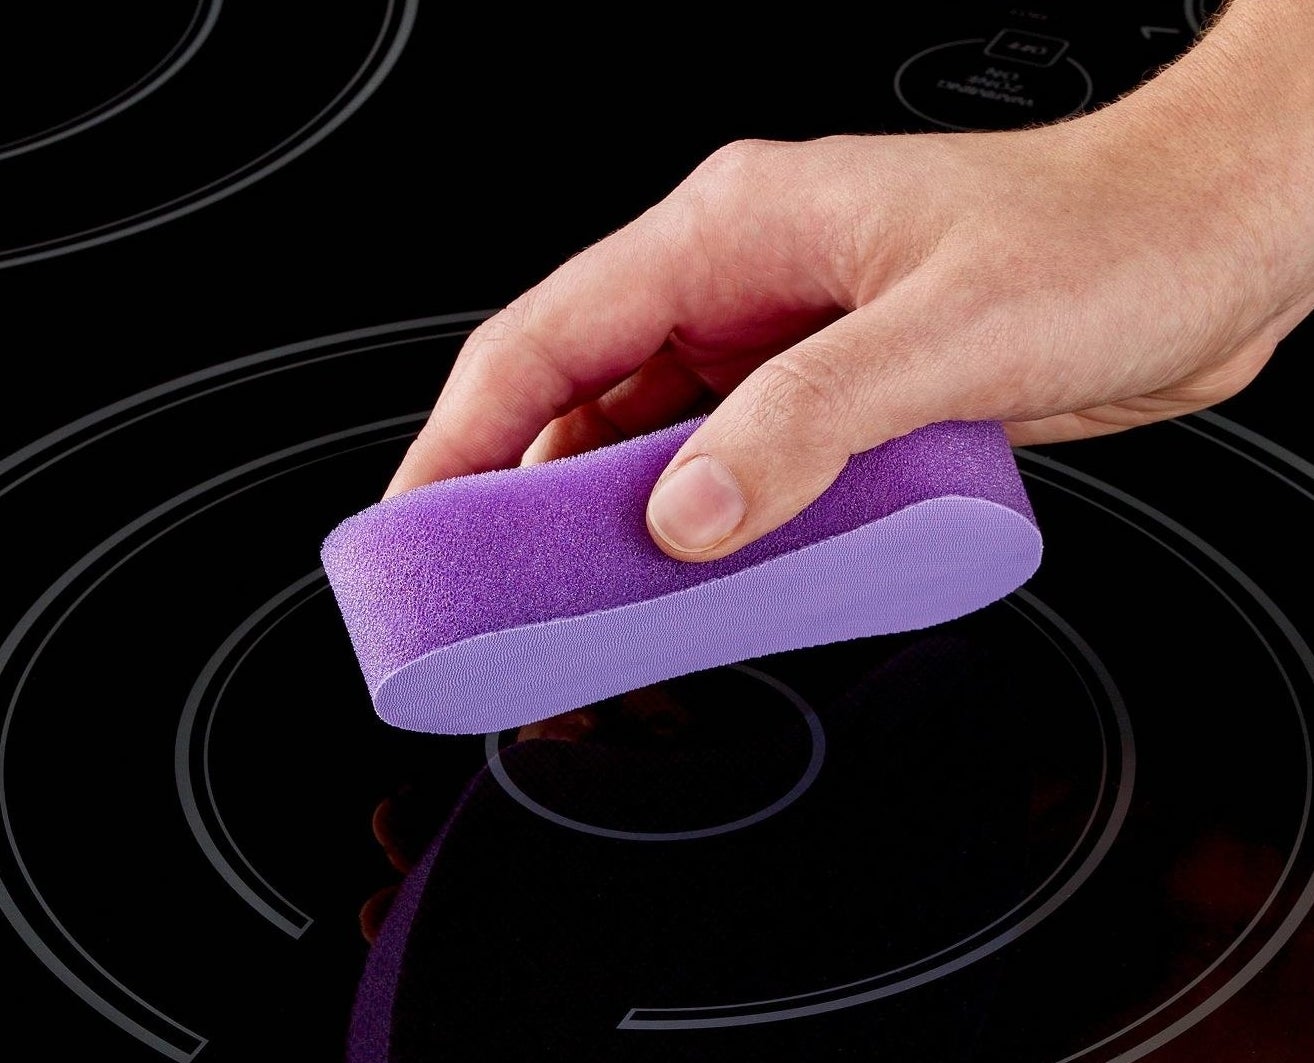 Model using a pad to wipe off glass top stove